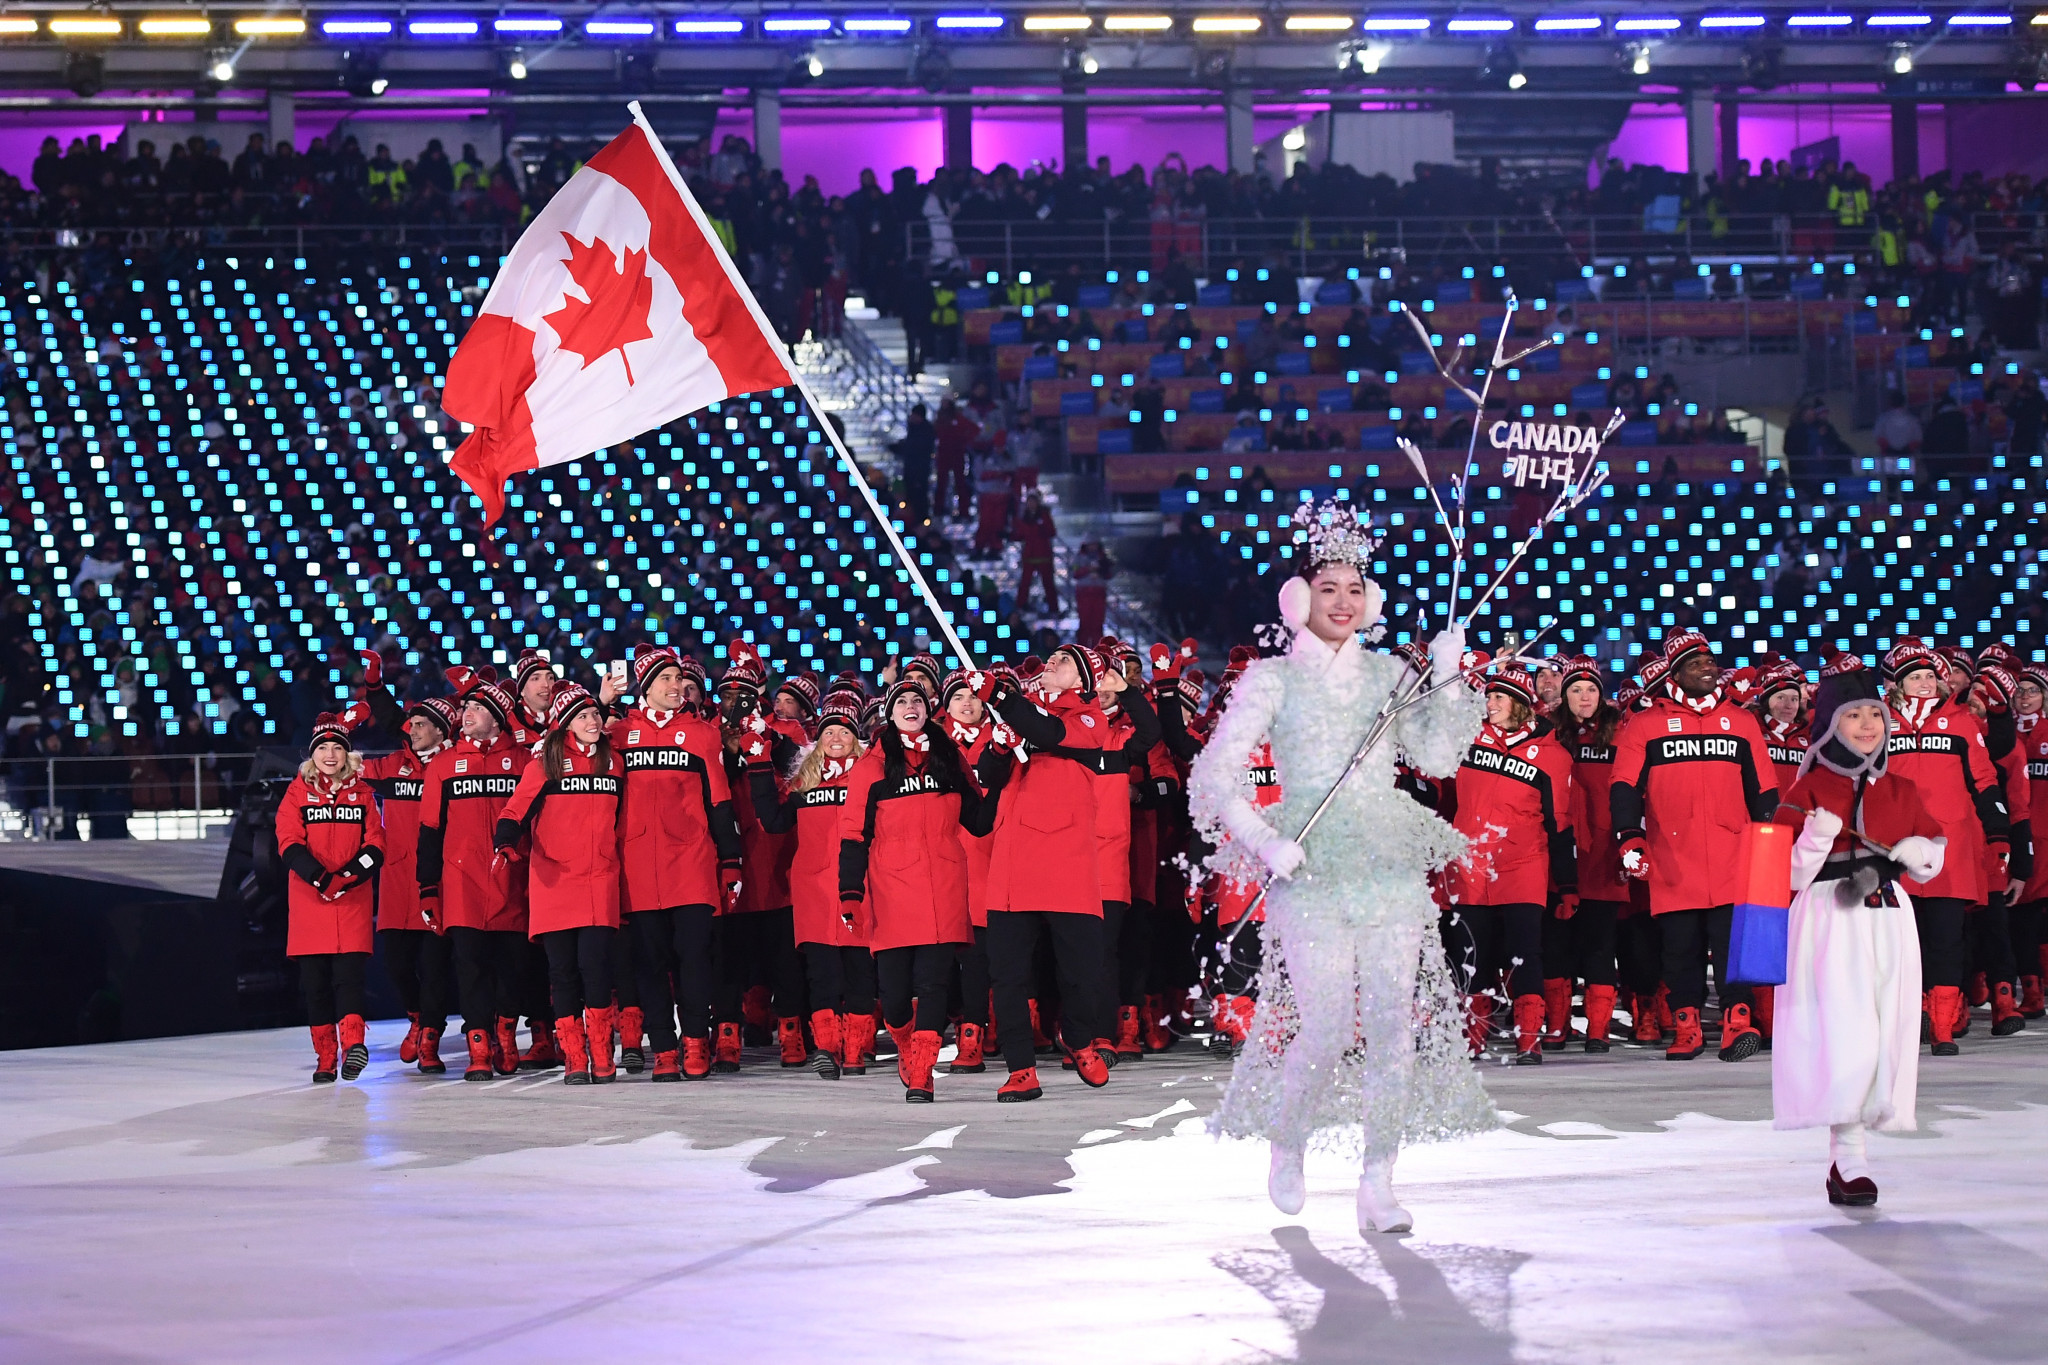 Canada achieved its best medal total at a Winter Olympics at Pyeongchang 2018 ©Getty Images